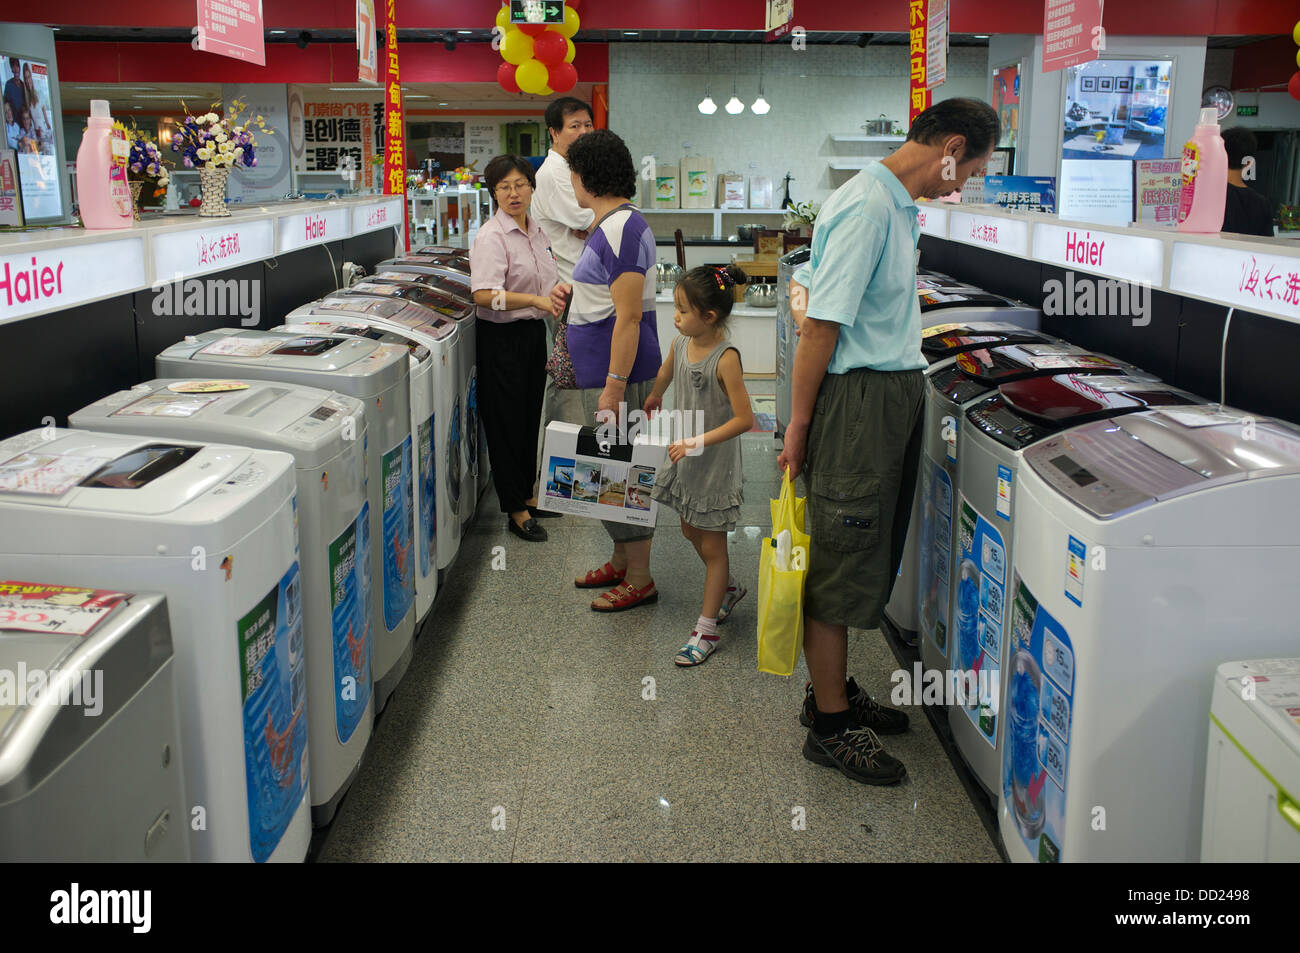 Haier washing machines are on sale in a Gome electrical appliances store in Beijing, China. 2013 Stock Photo